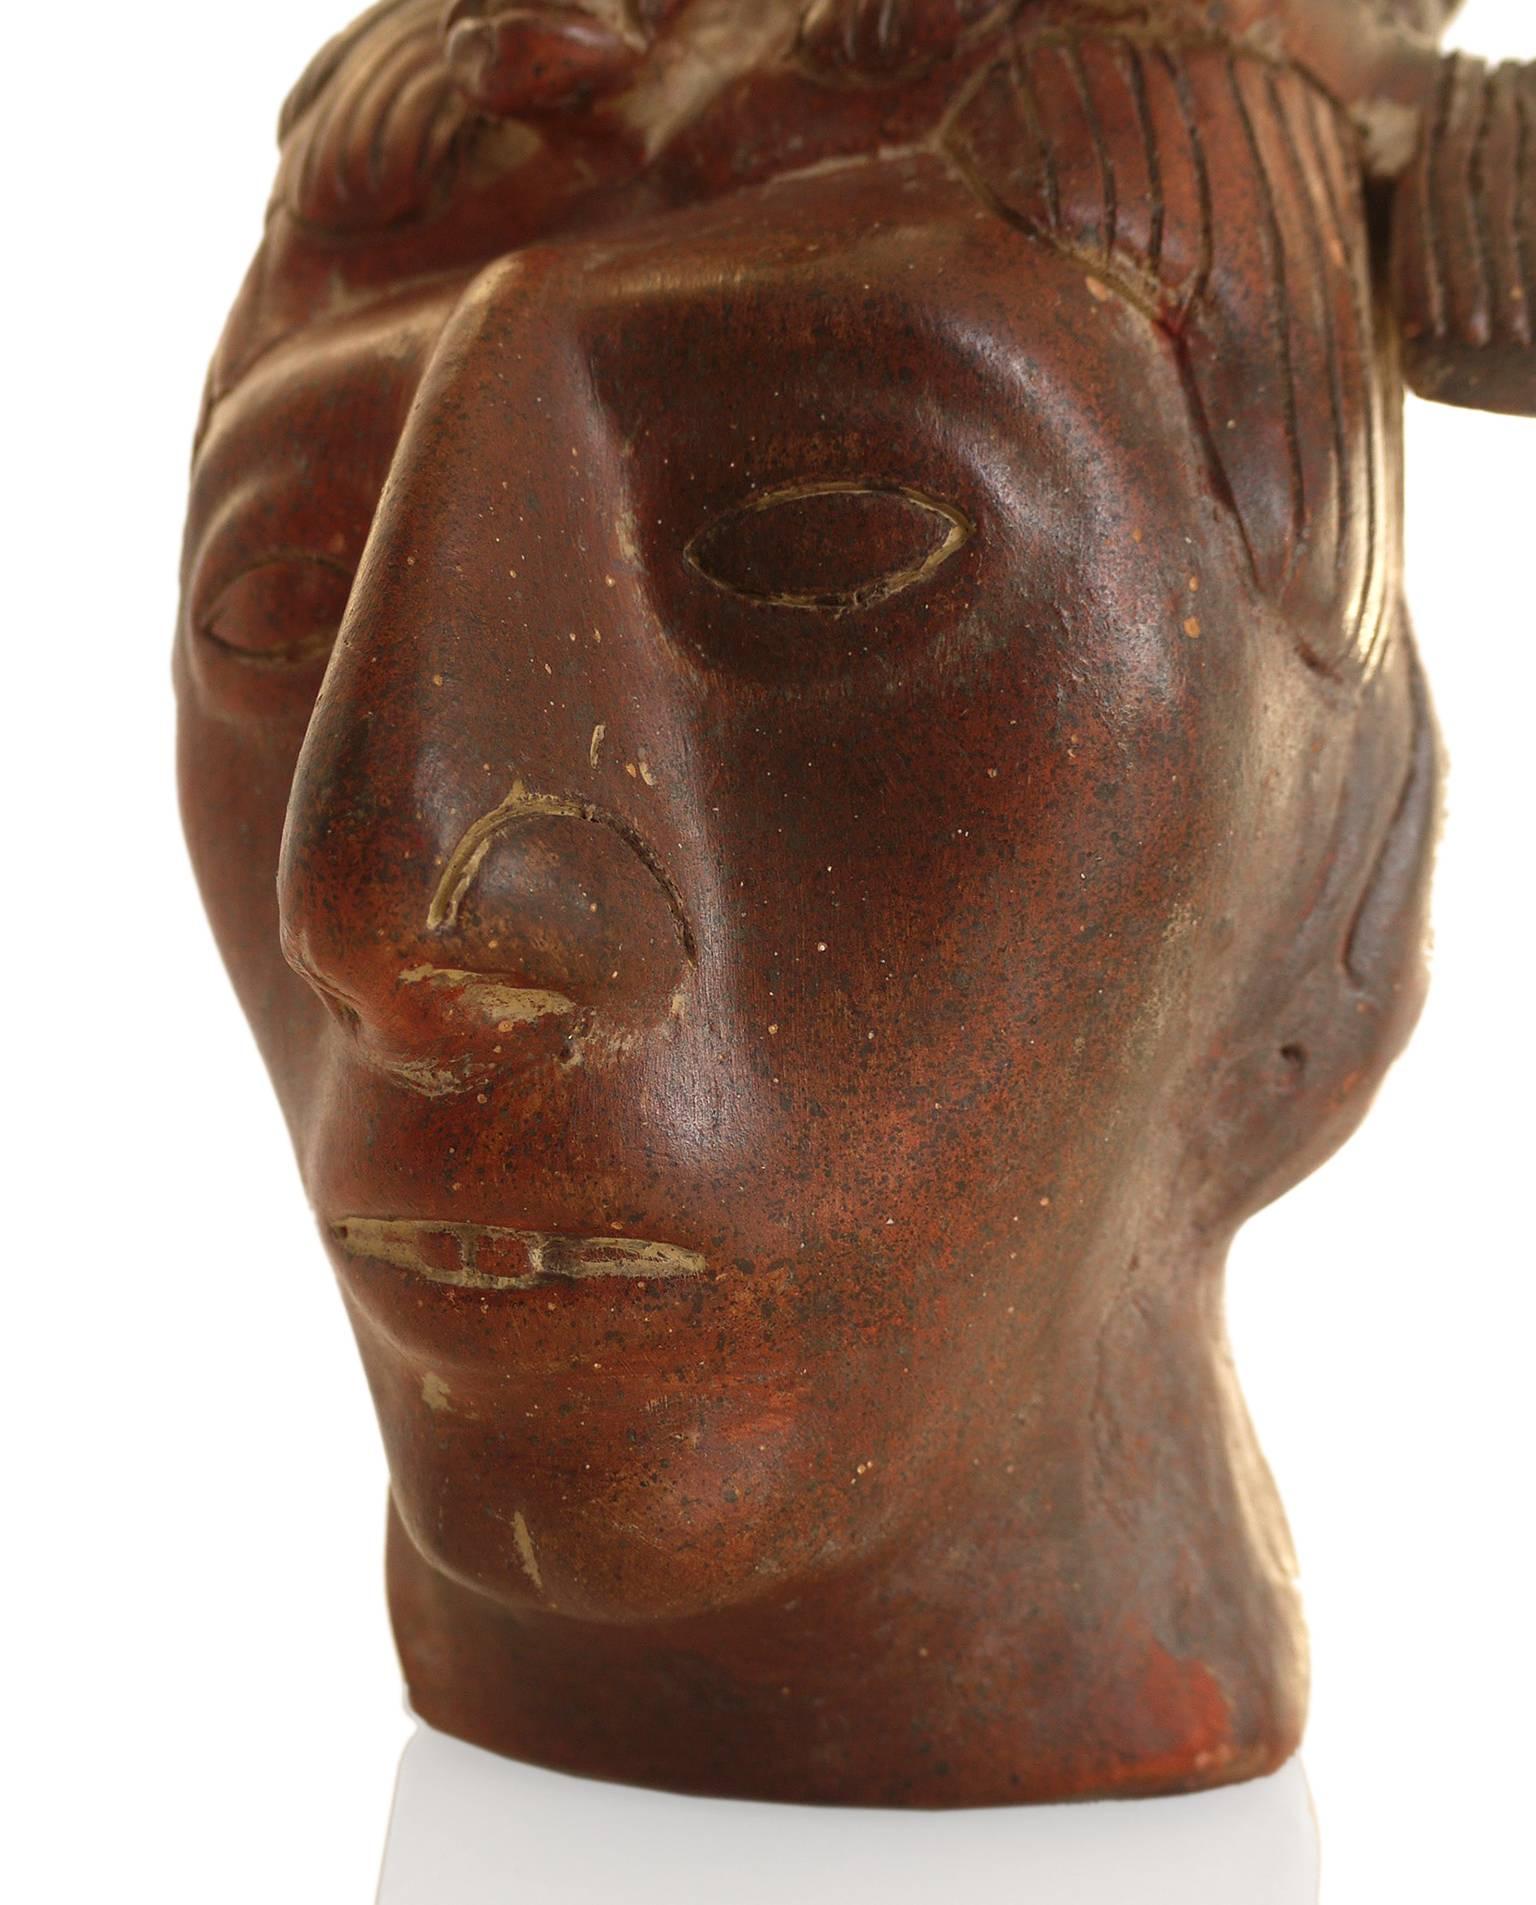 Superb vintage Aztec Mayan style terra cotta hand-sculpted head of King Pacal of Palenque.
The sculpture is created in traditional pre Columbian style pottery techniques, hand molded, sculpted, fired and glazed.
 